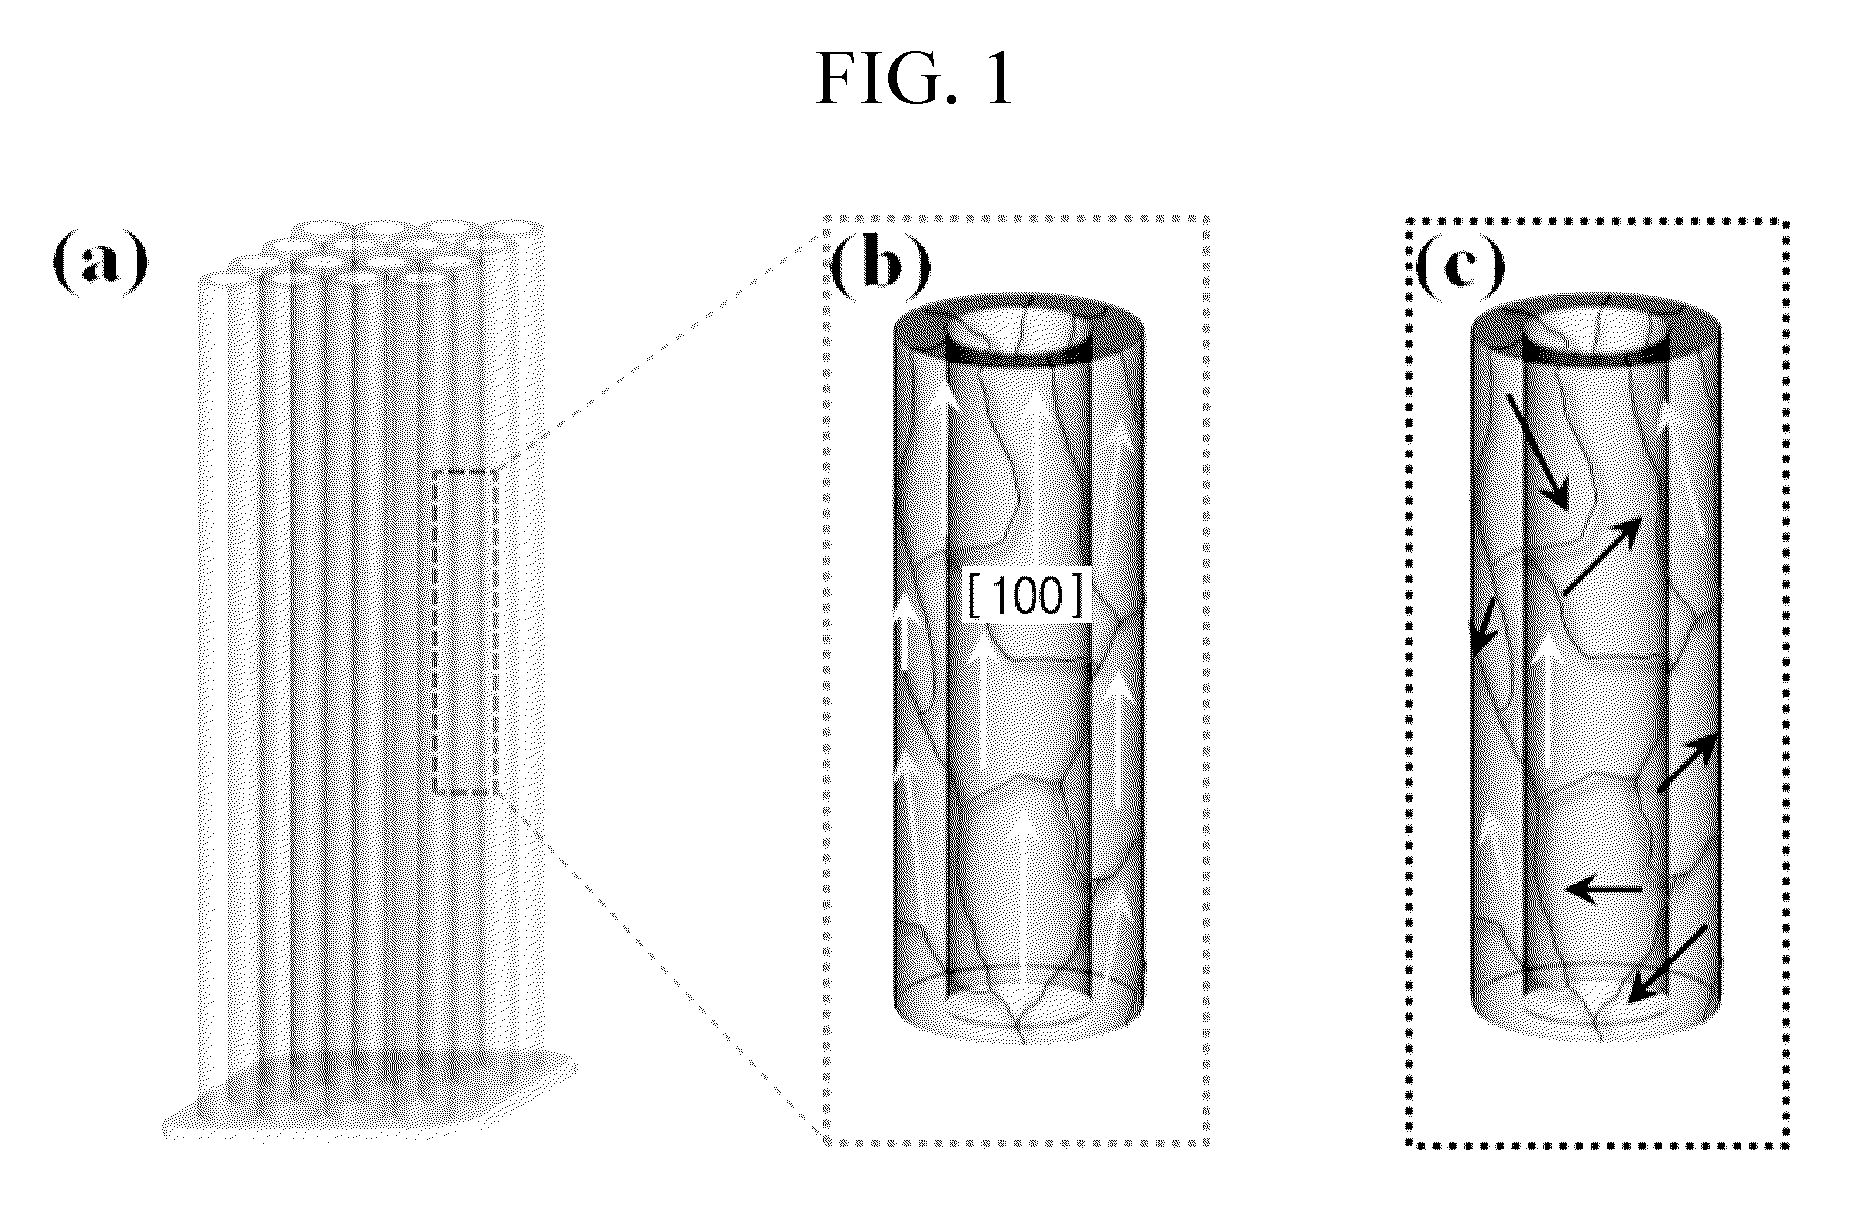 Titanium oxide nano tube material and method for manufacturing the same